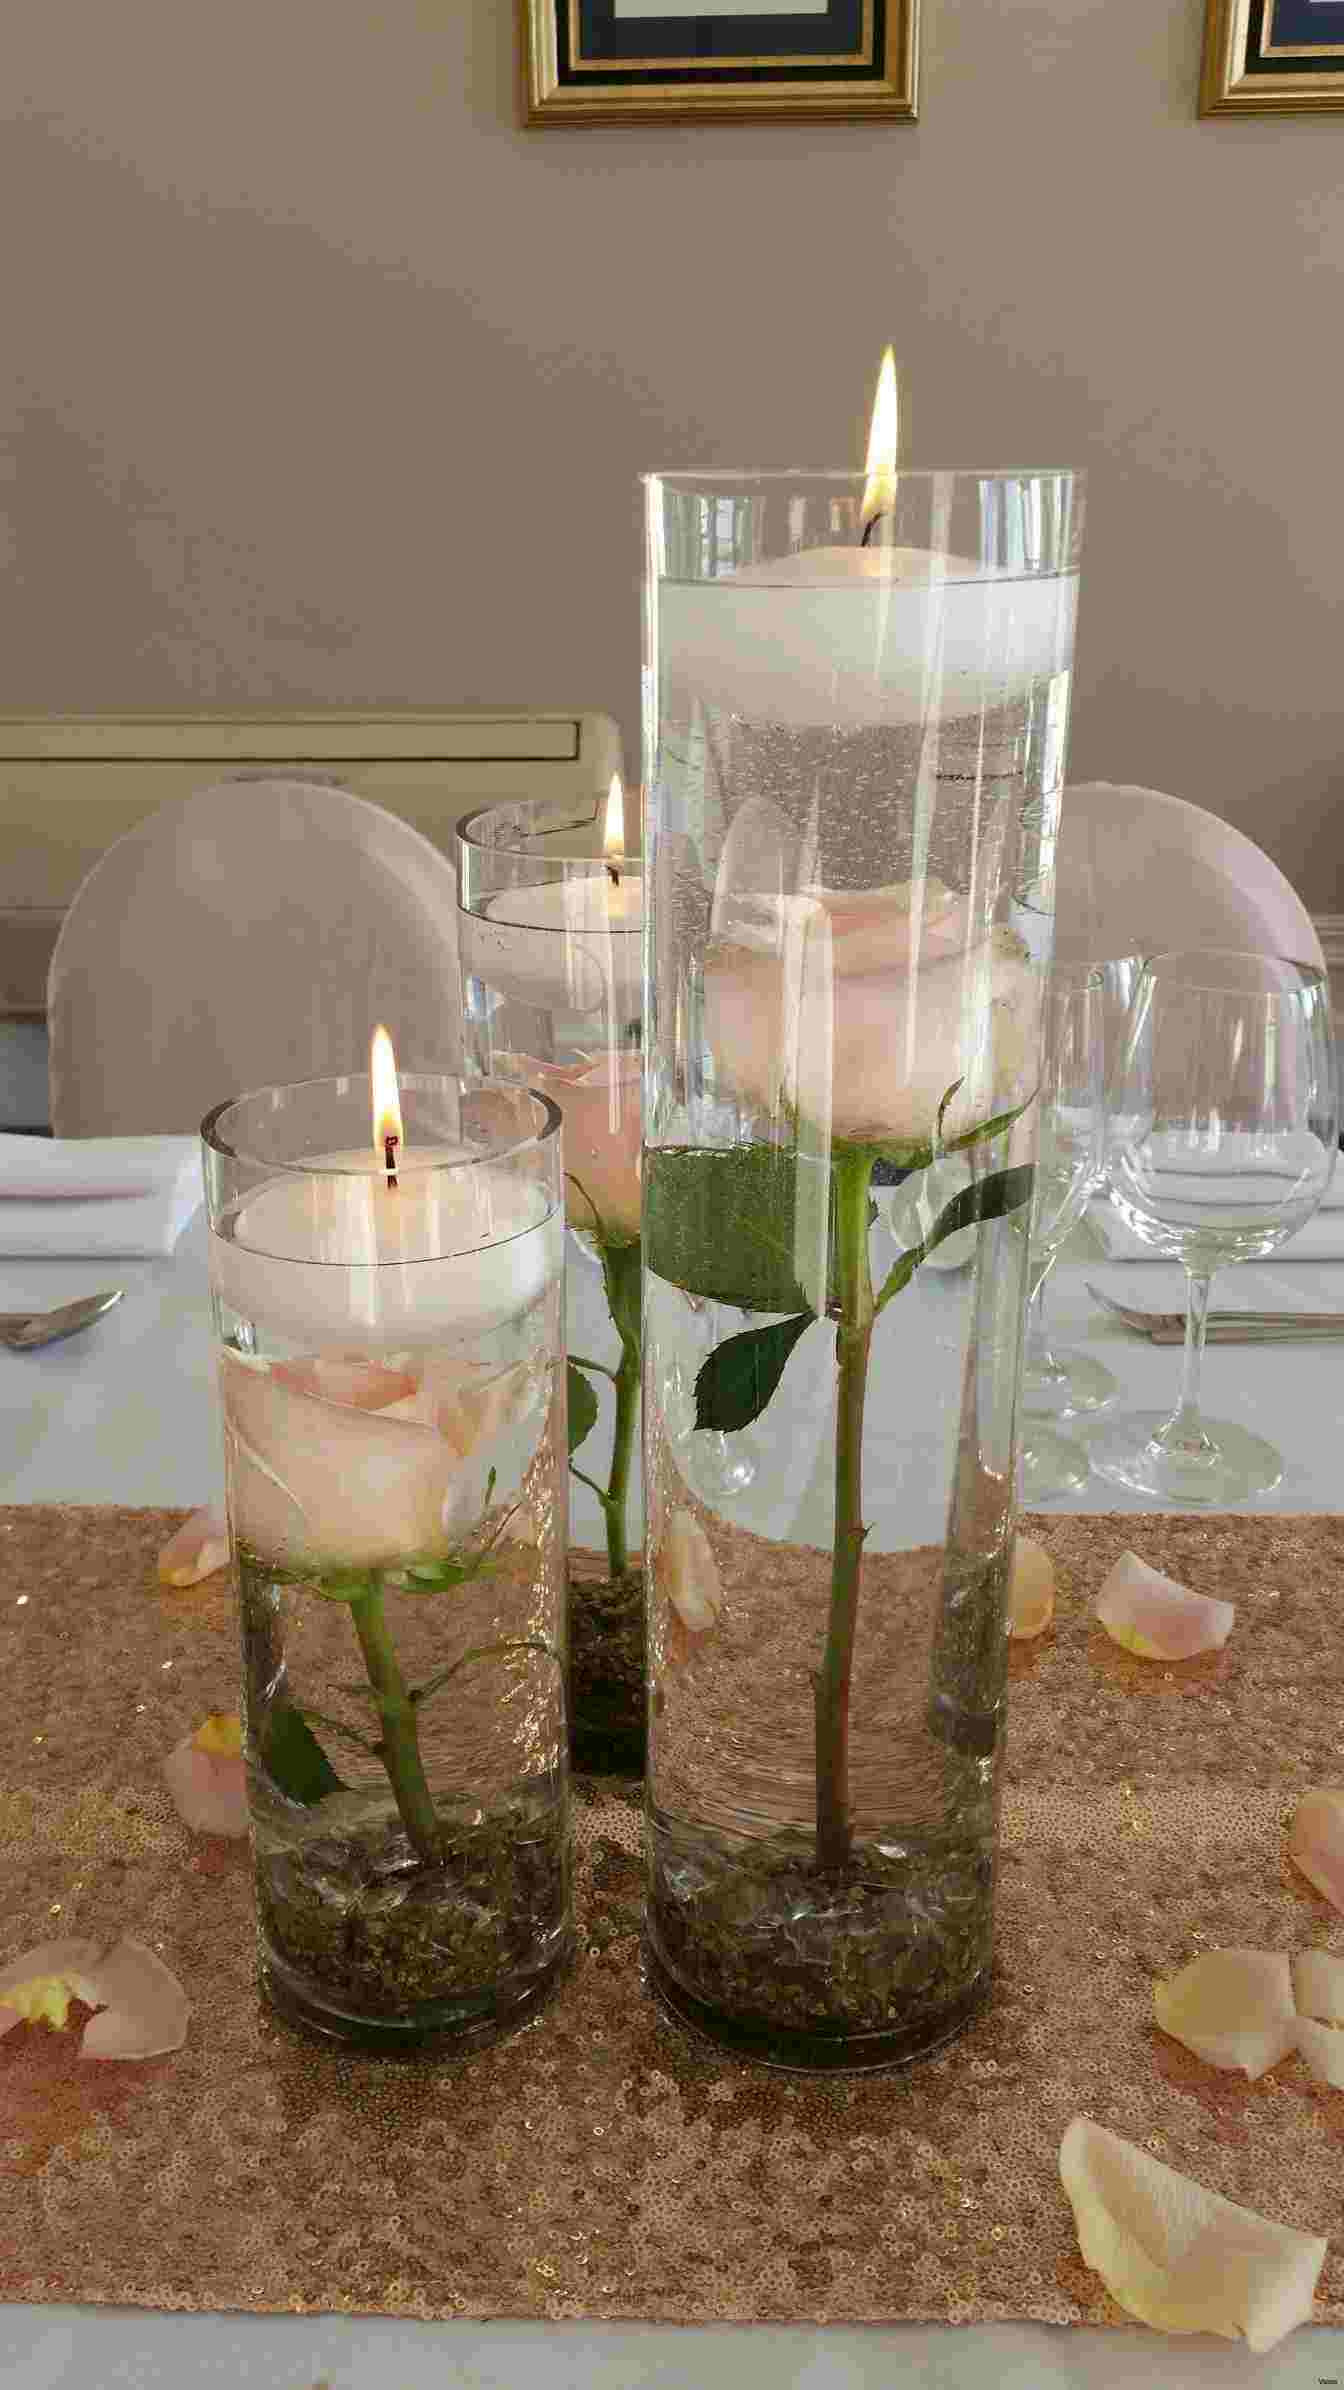 22 Elegant 18 Cylinder Vases wholesale 2024 free download 18 cylinder vases wholesale of glass cylinder vase centerpiece ideas stock floating candles regarding glass cylinder vase centerpiece ideas stock floating candles decoration fresh until tall